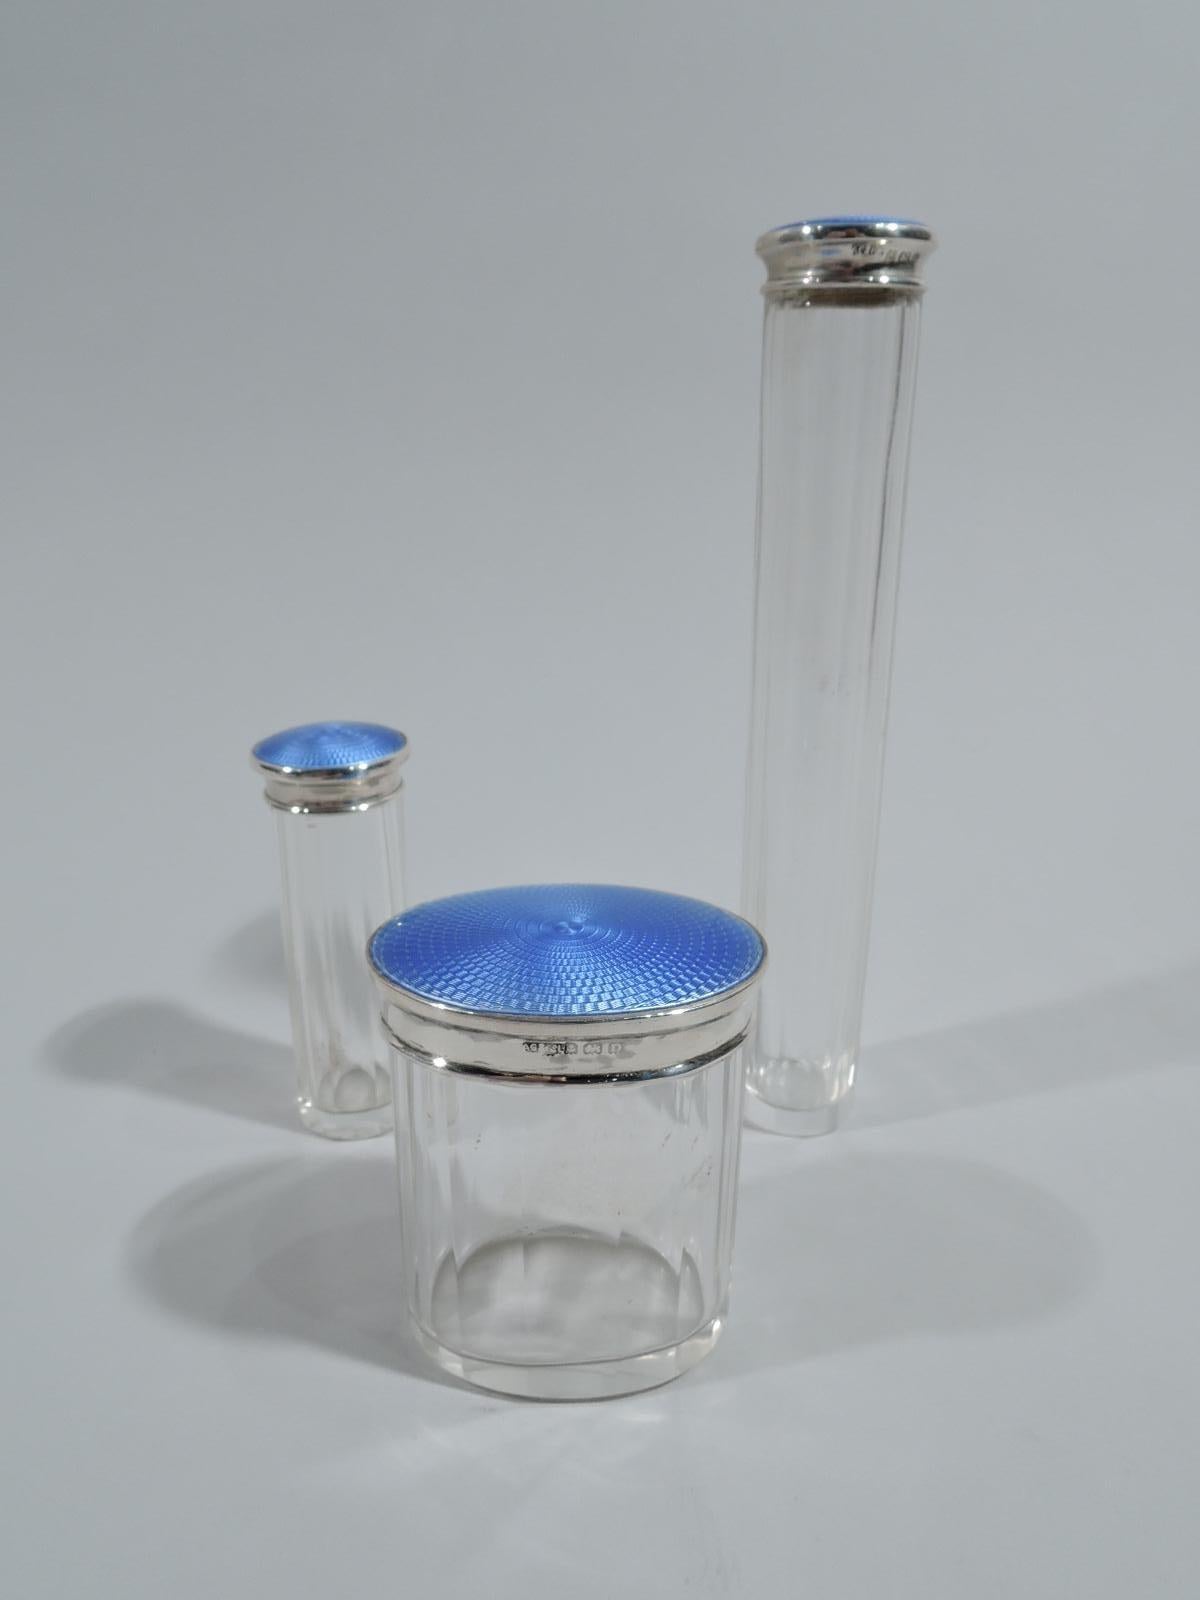 Set of 3 English Art Deco glass vanity jars with sterling silver and enamel covers. Each: Faceted and straight sides. Cover top has concentric guilloche enamel ornament. Cover sides sterling silver. Enamel is blue. Glass is clear. One jar is oval